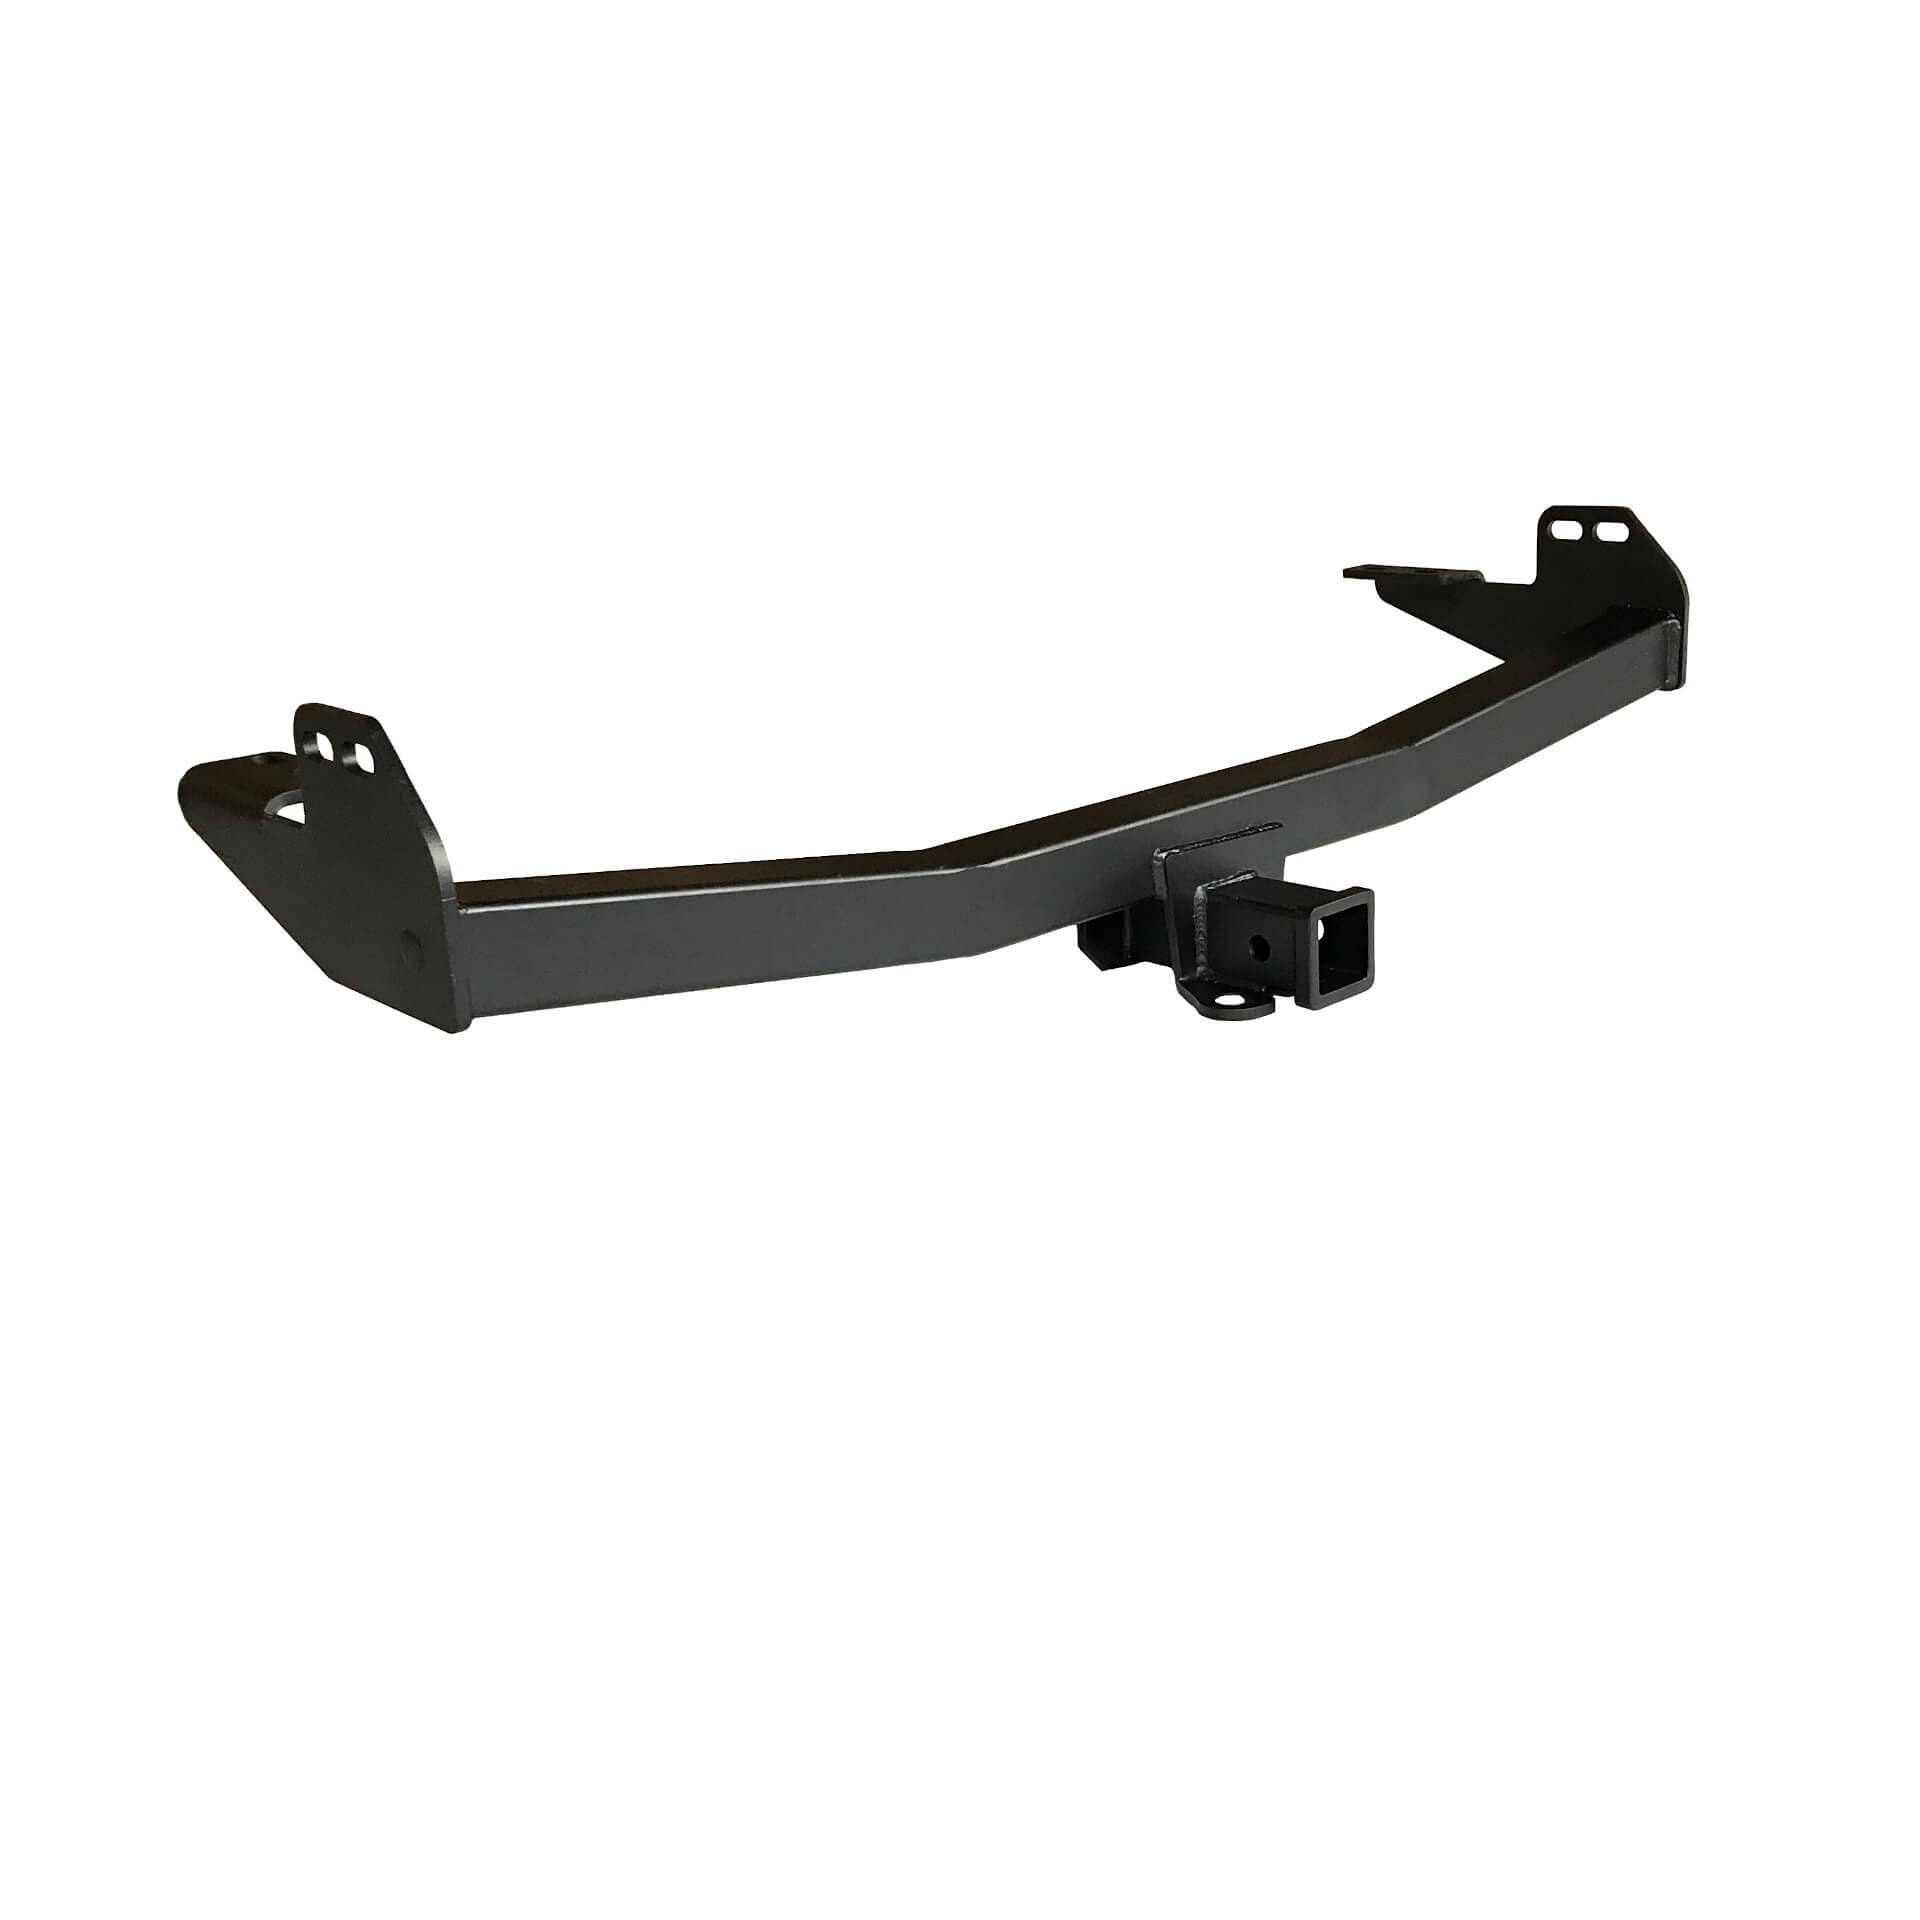 Direct4x4 Pickup Truck Tow Hitch Bars